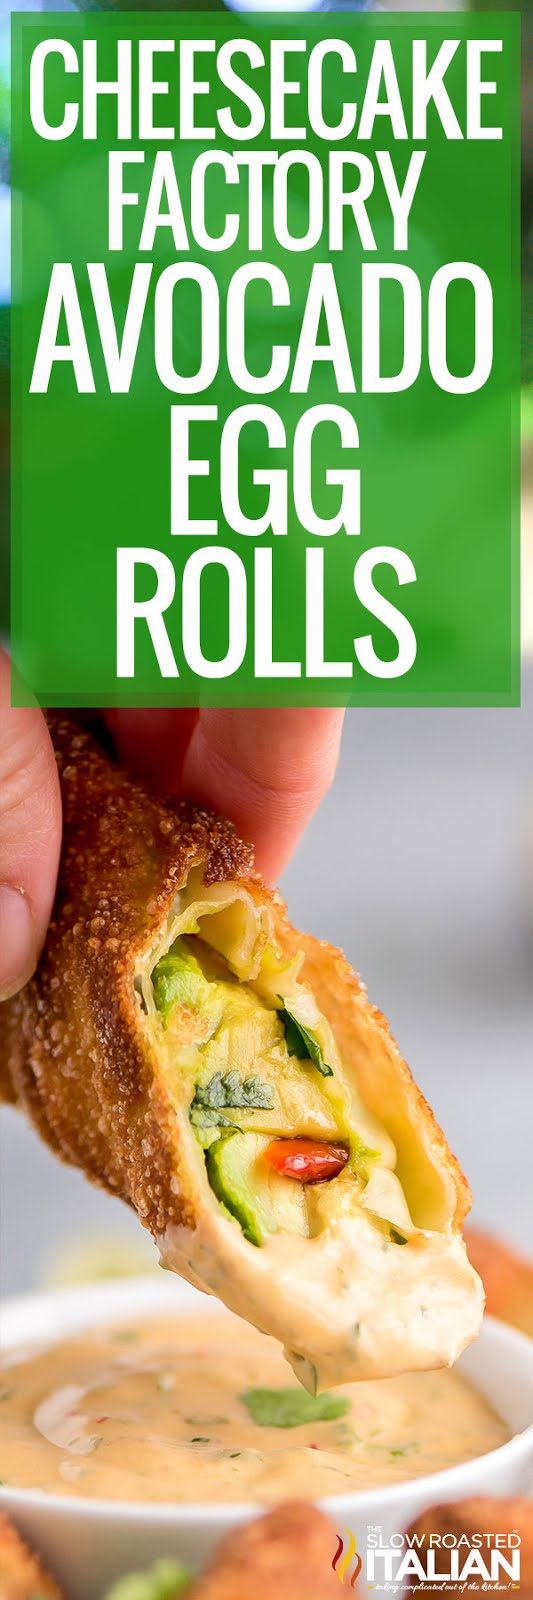 titled image (and shown): cheesecake factory avocado egg rolls